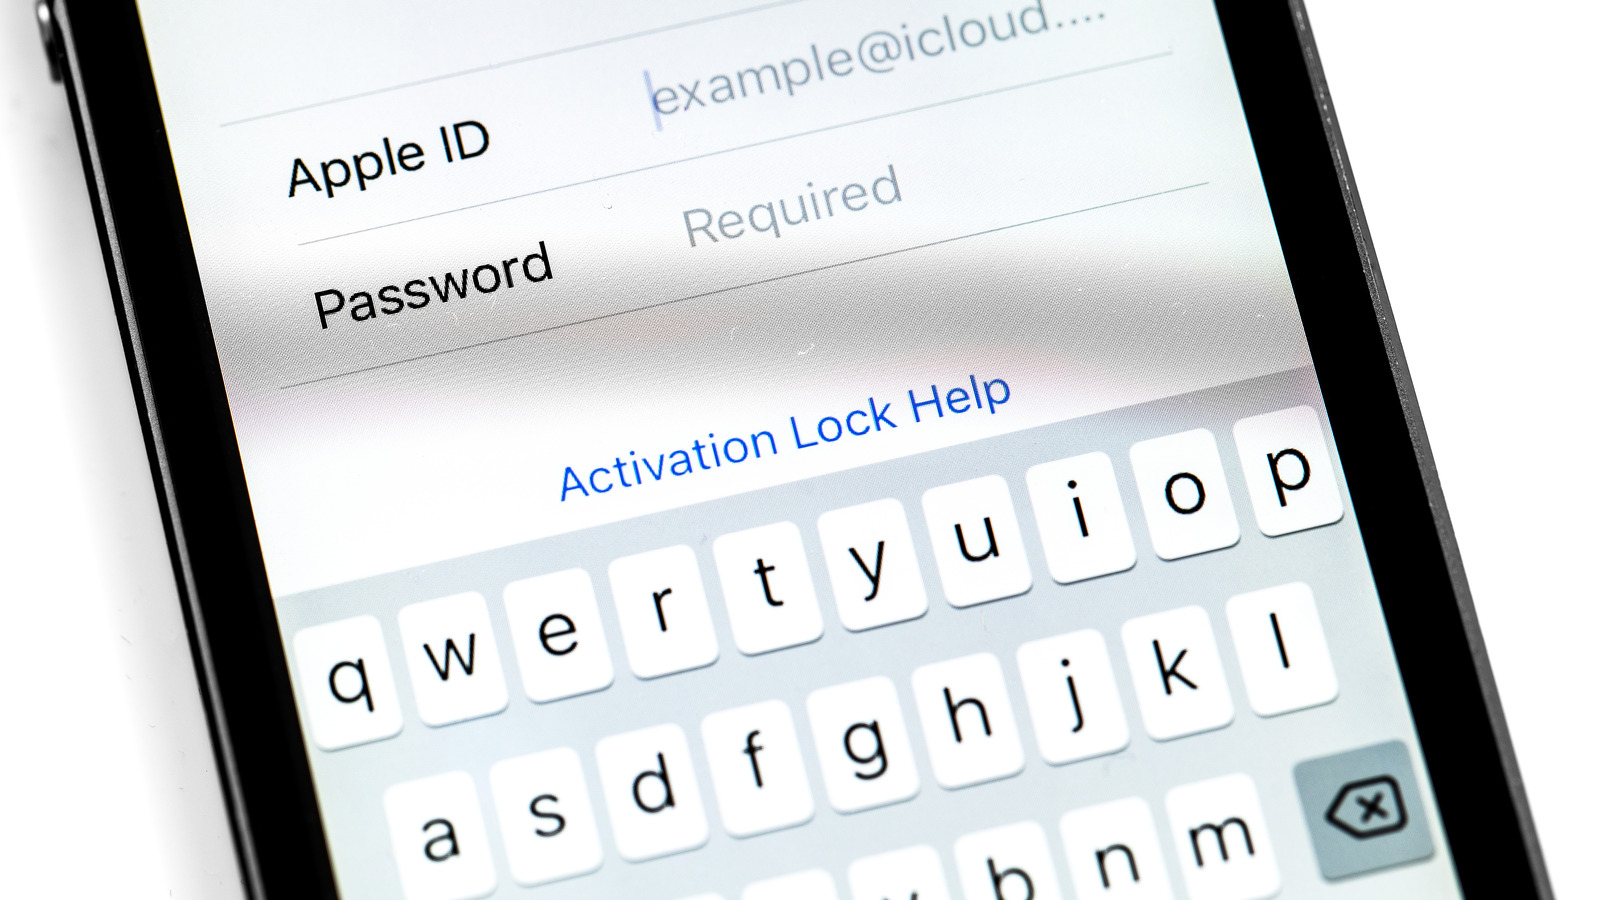 Apple Reveals Three Major Security Features For iMessage, iCloud, And 2FA